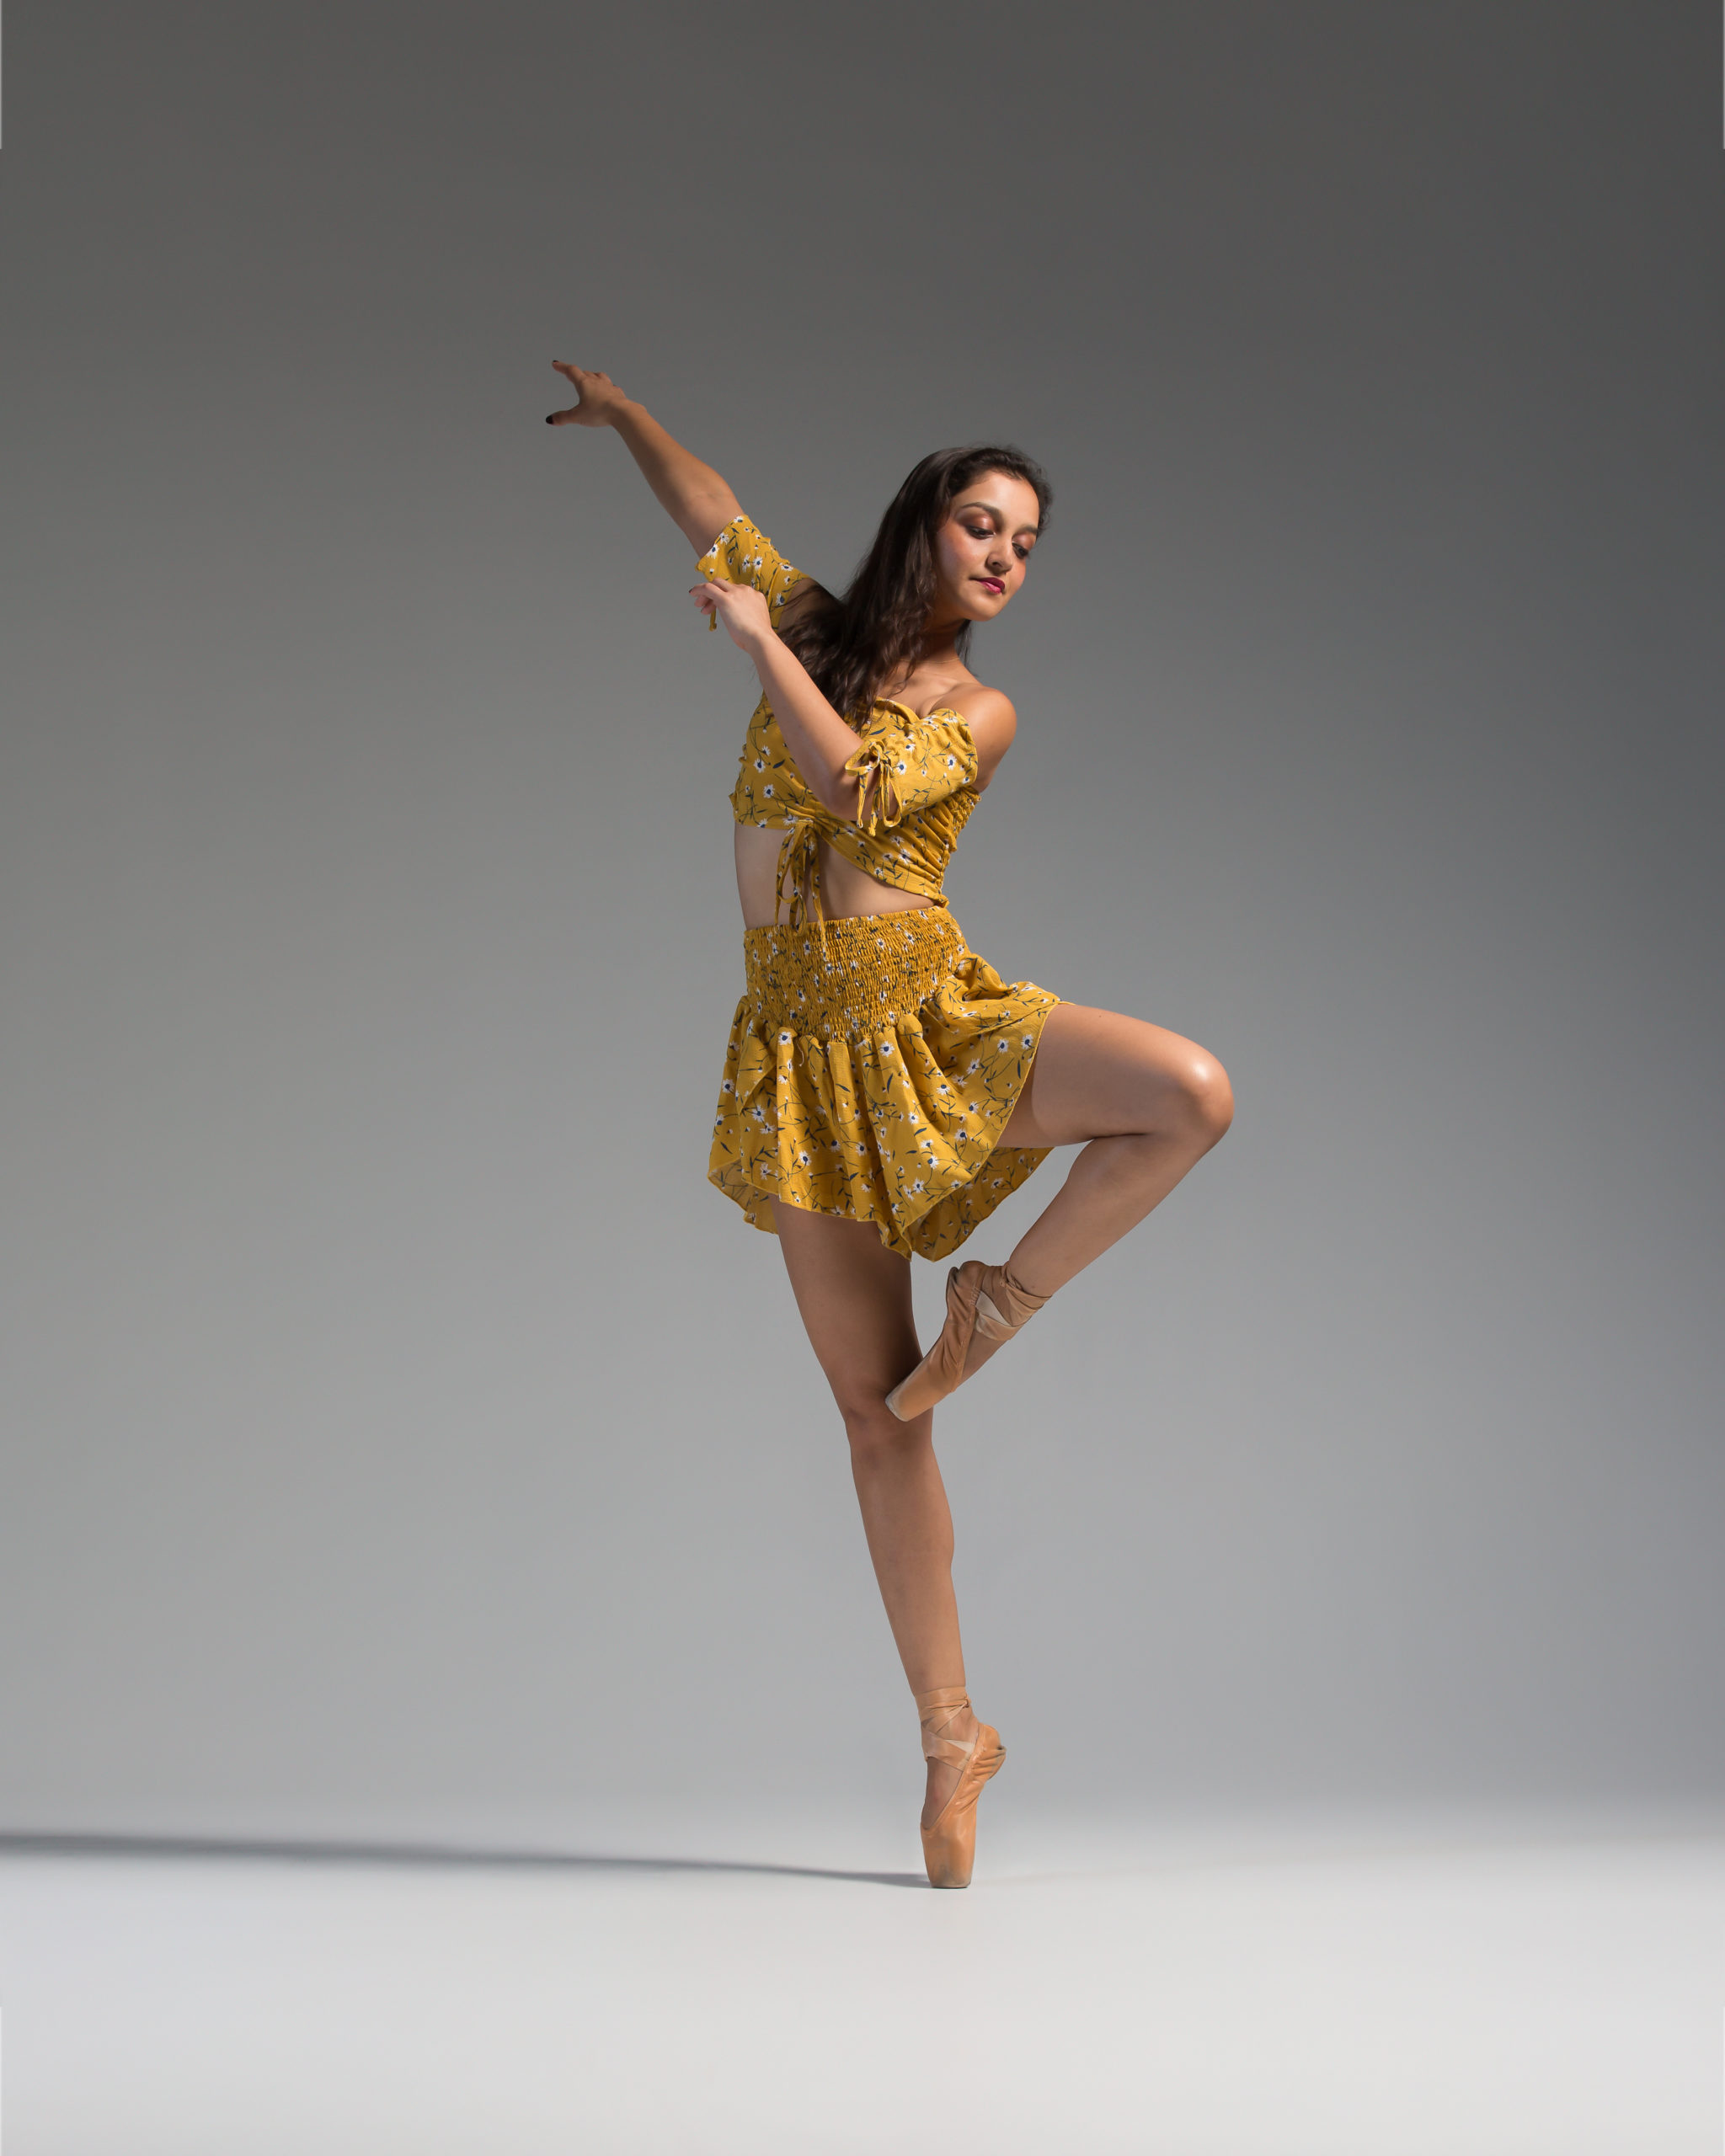 A woman in yellow dress doing a dance move.